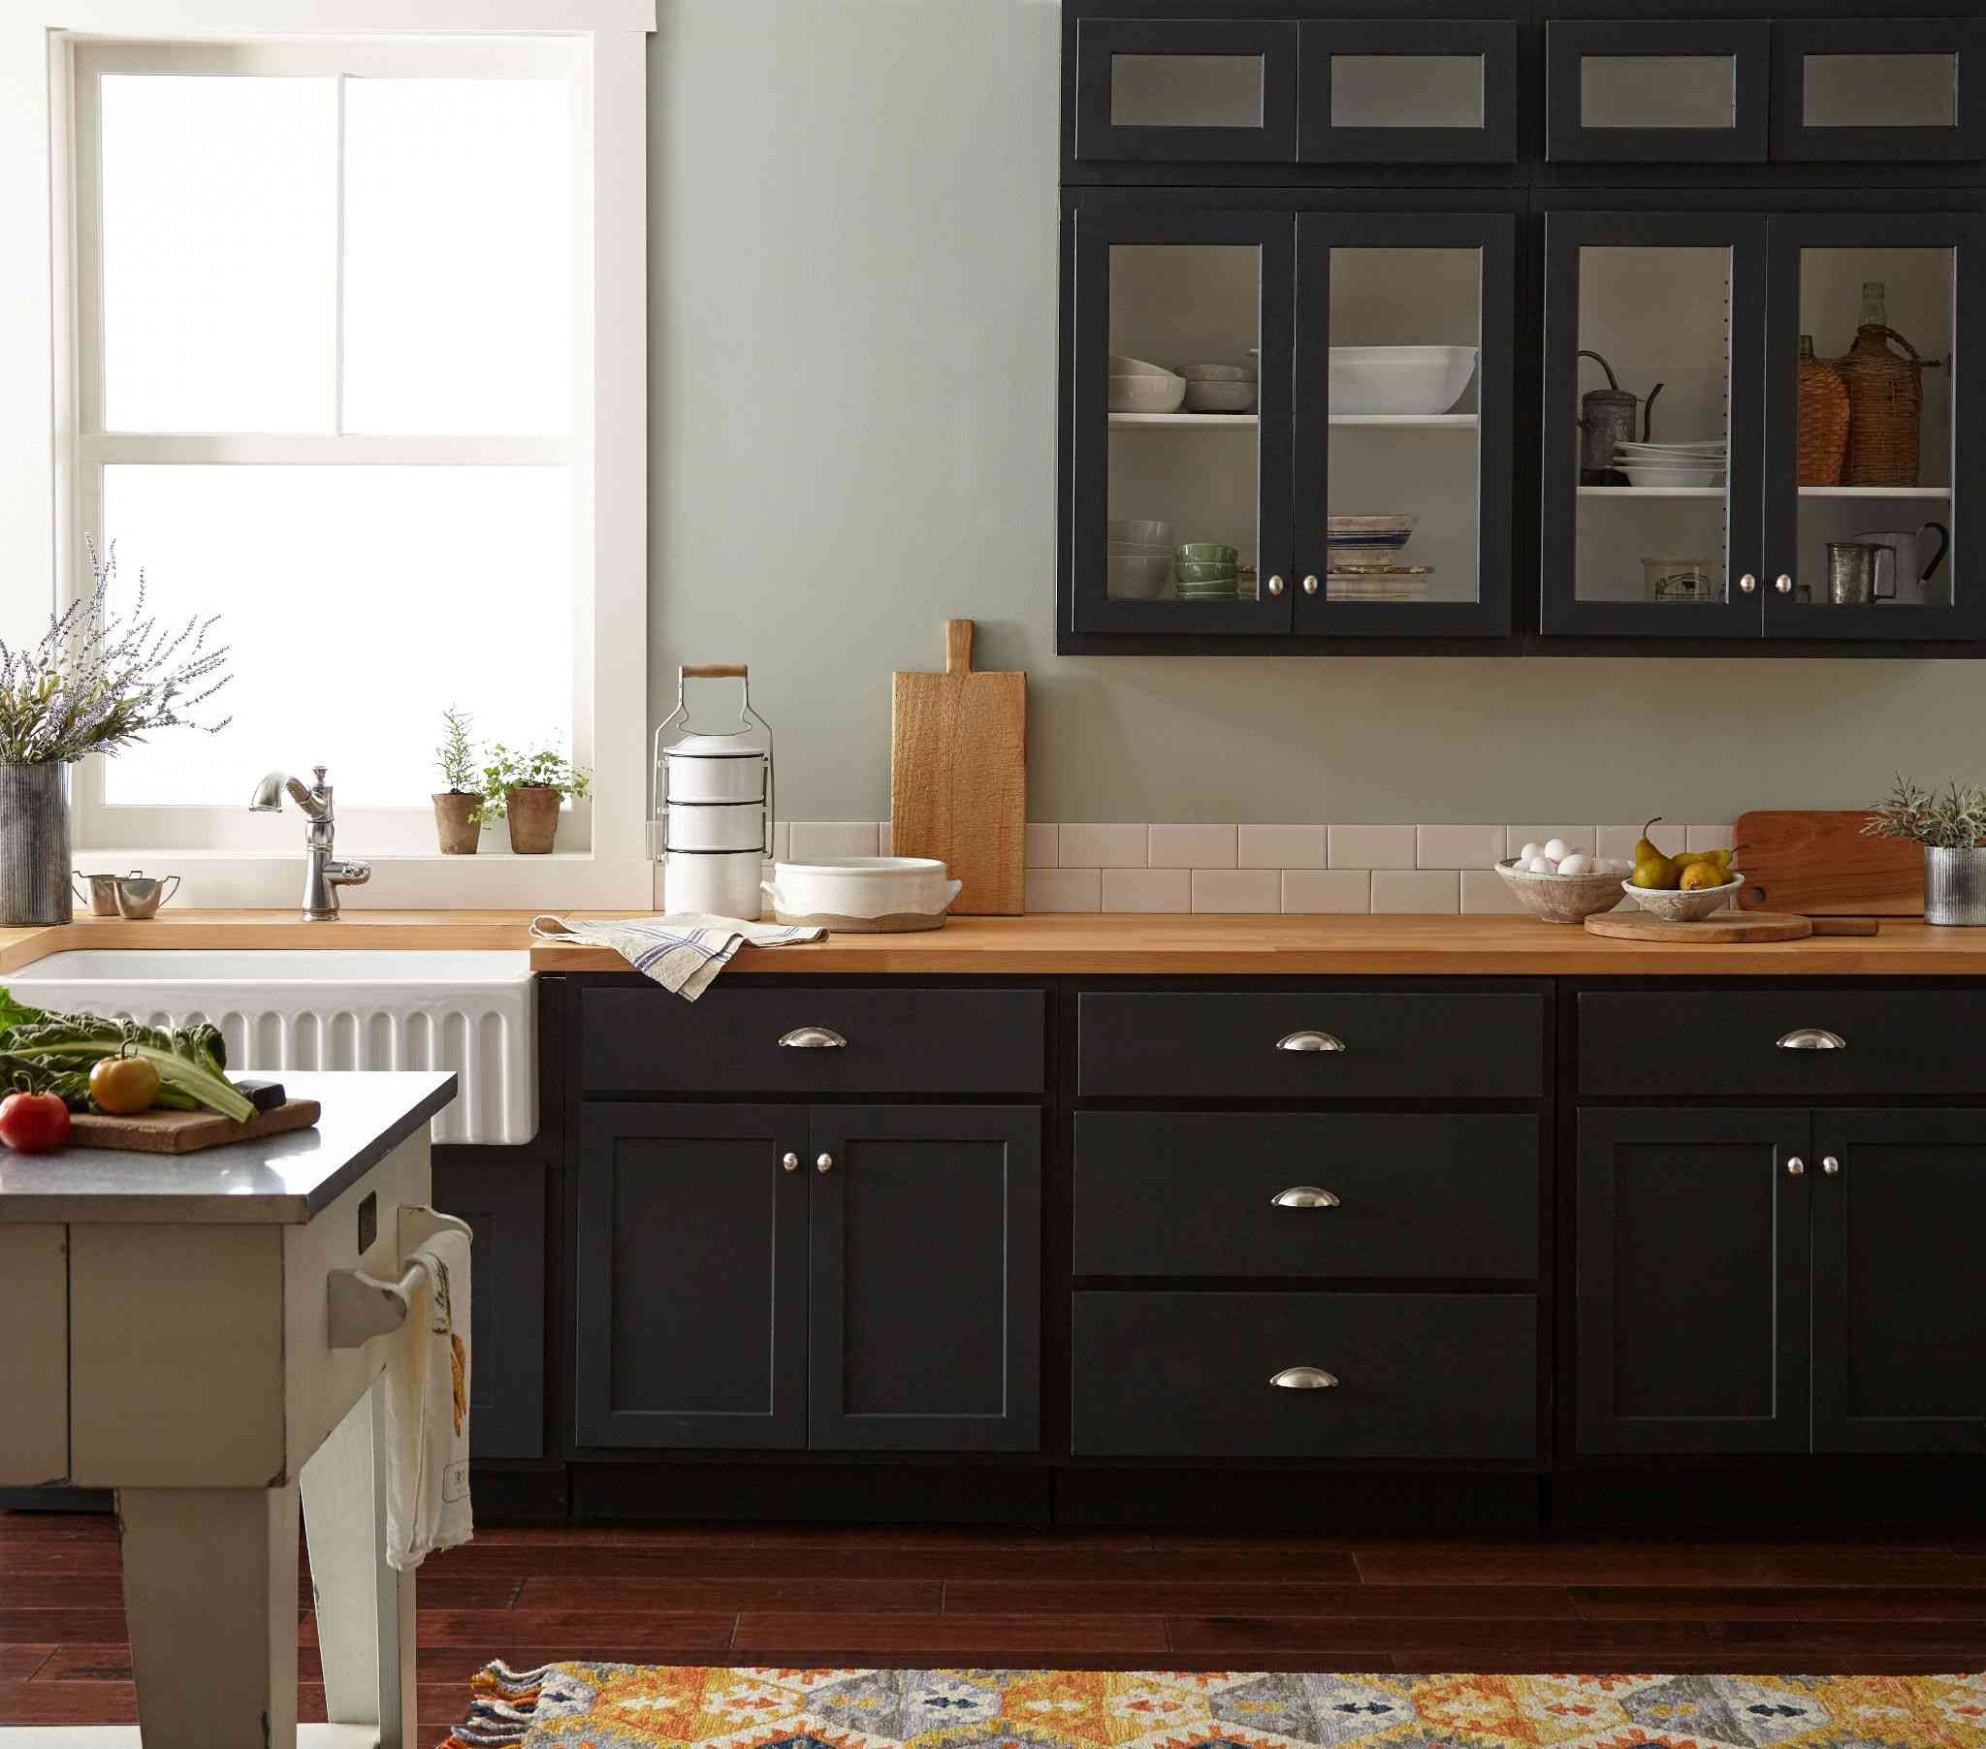 10 Best Kitchen Cabinet Paint Colors, According to Pros - what is the most popular color for kitchen cabinets 2018?